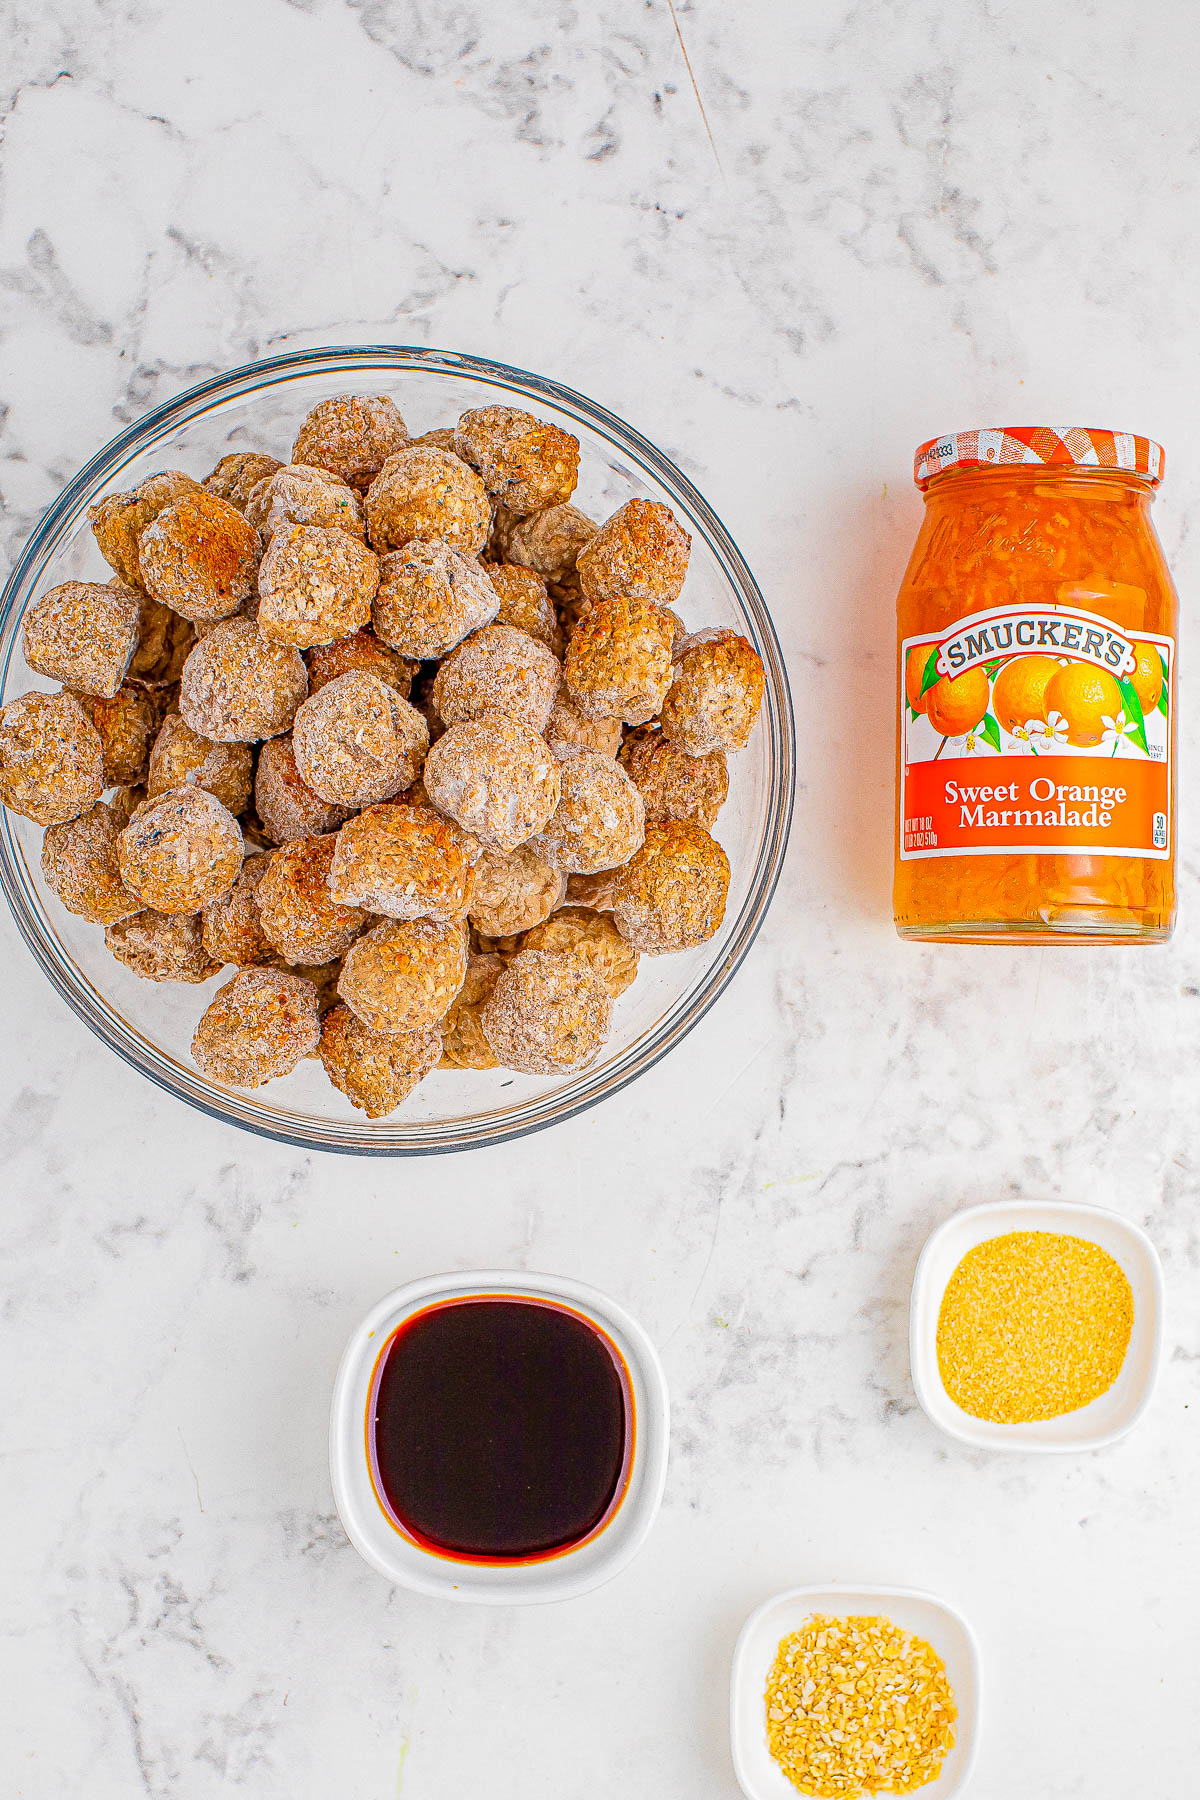 A bowl of meatballs next to a jar of smucker's sweet orange marmalade, and small bowls of seasonings.